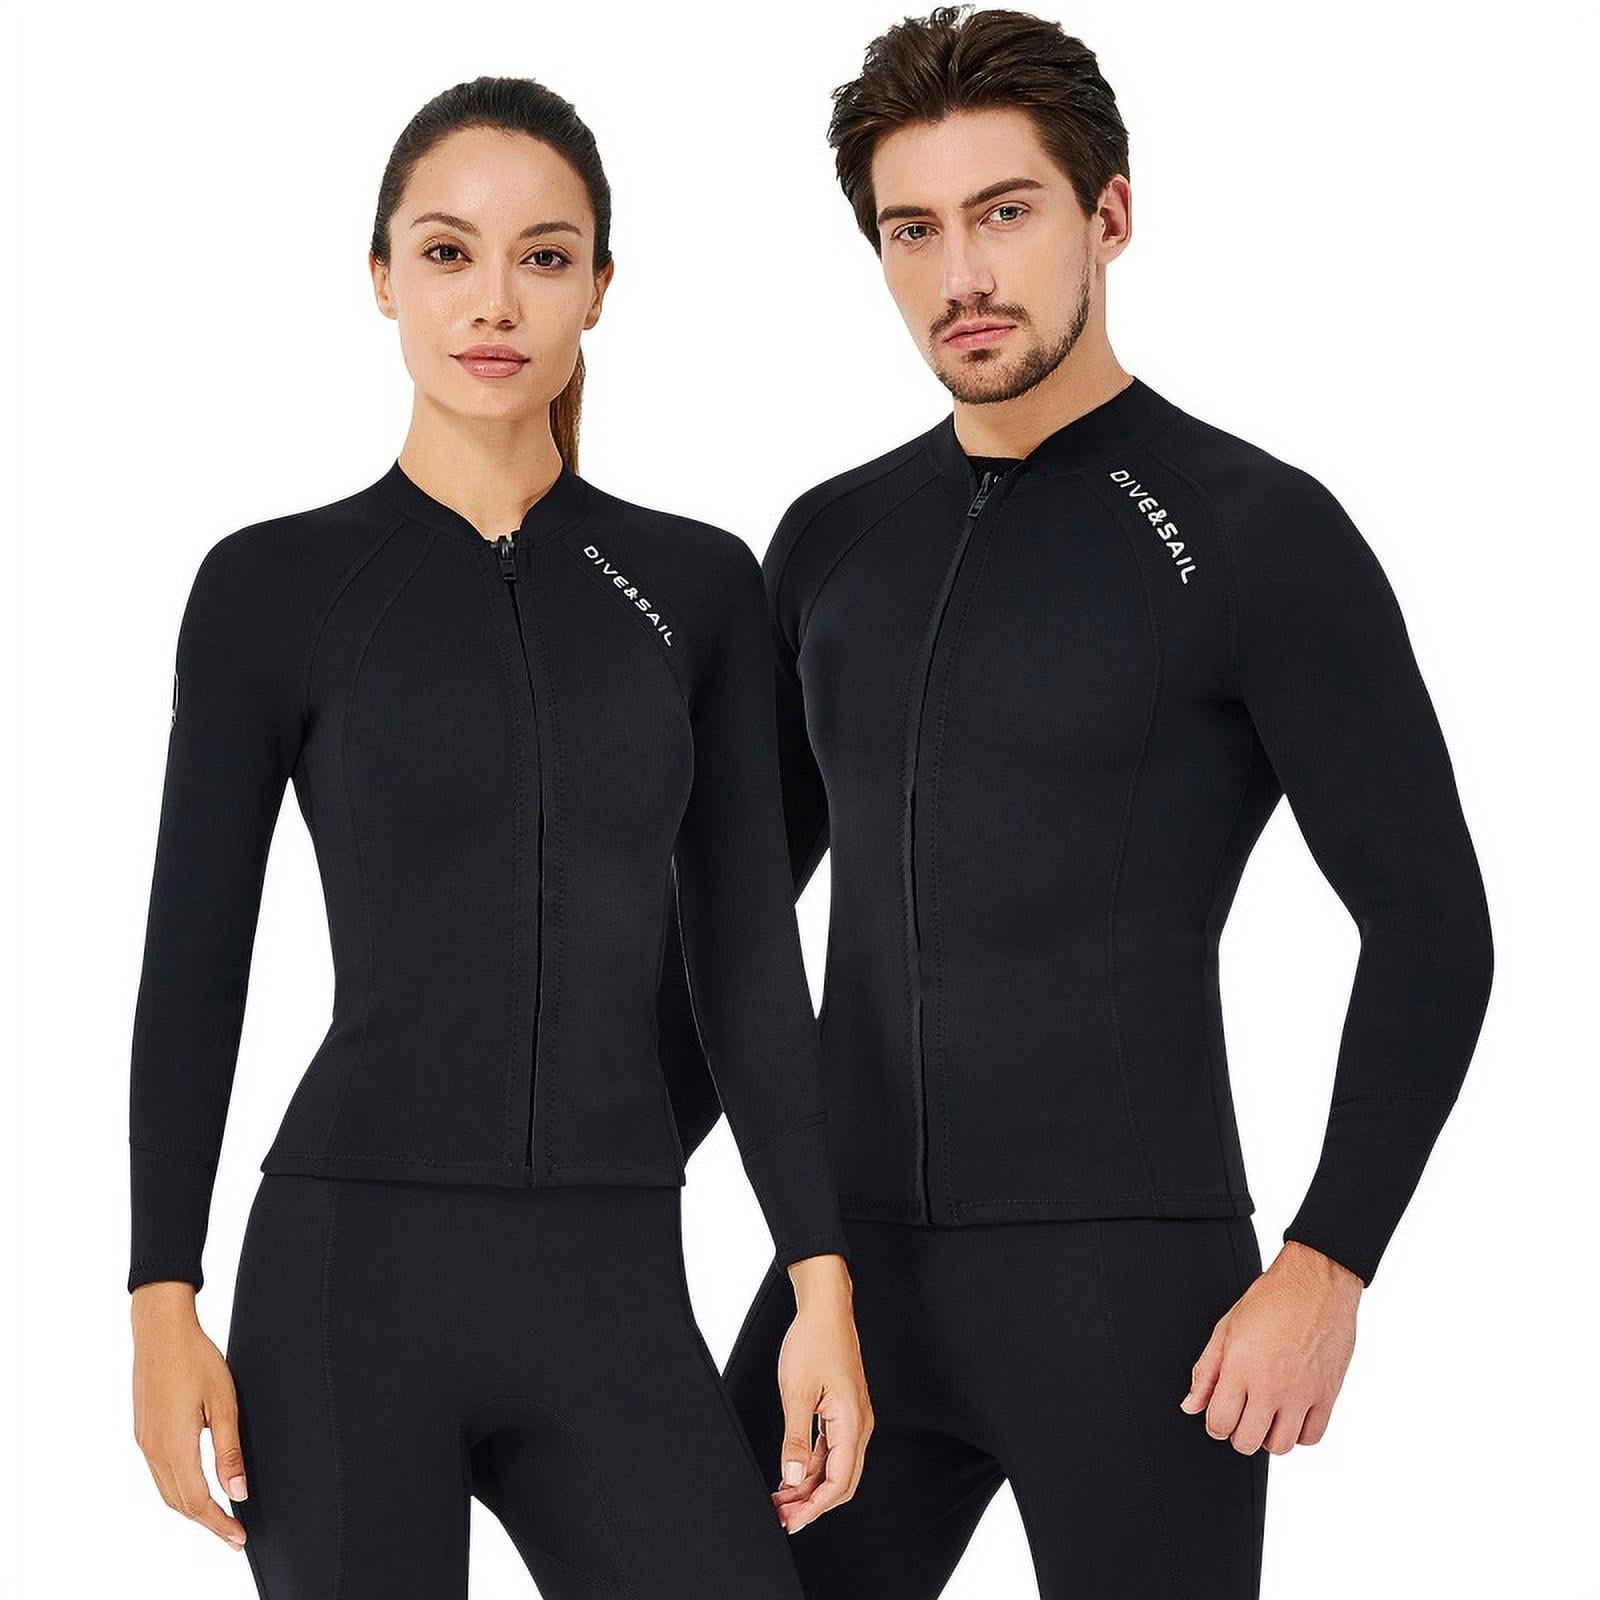 2mm Neoprene Long Sleeve Wetsuit Jacket Swimming Scuba Surfing Diving Suit Top for Adult & Youth Owntop Men Women Wetsuit Top 